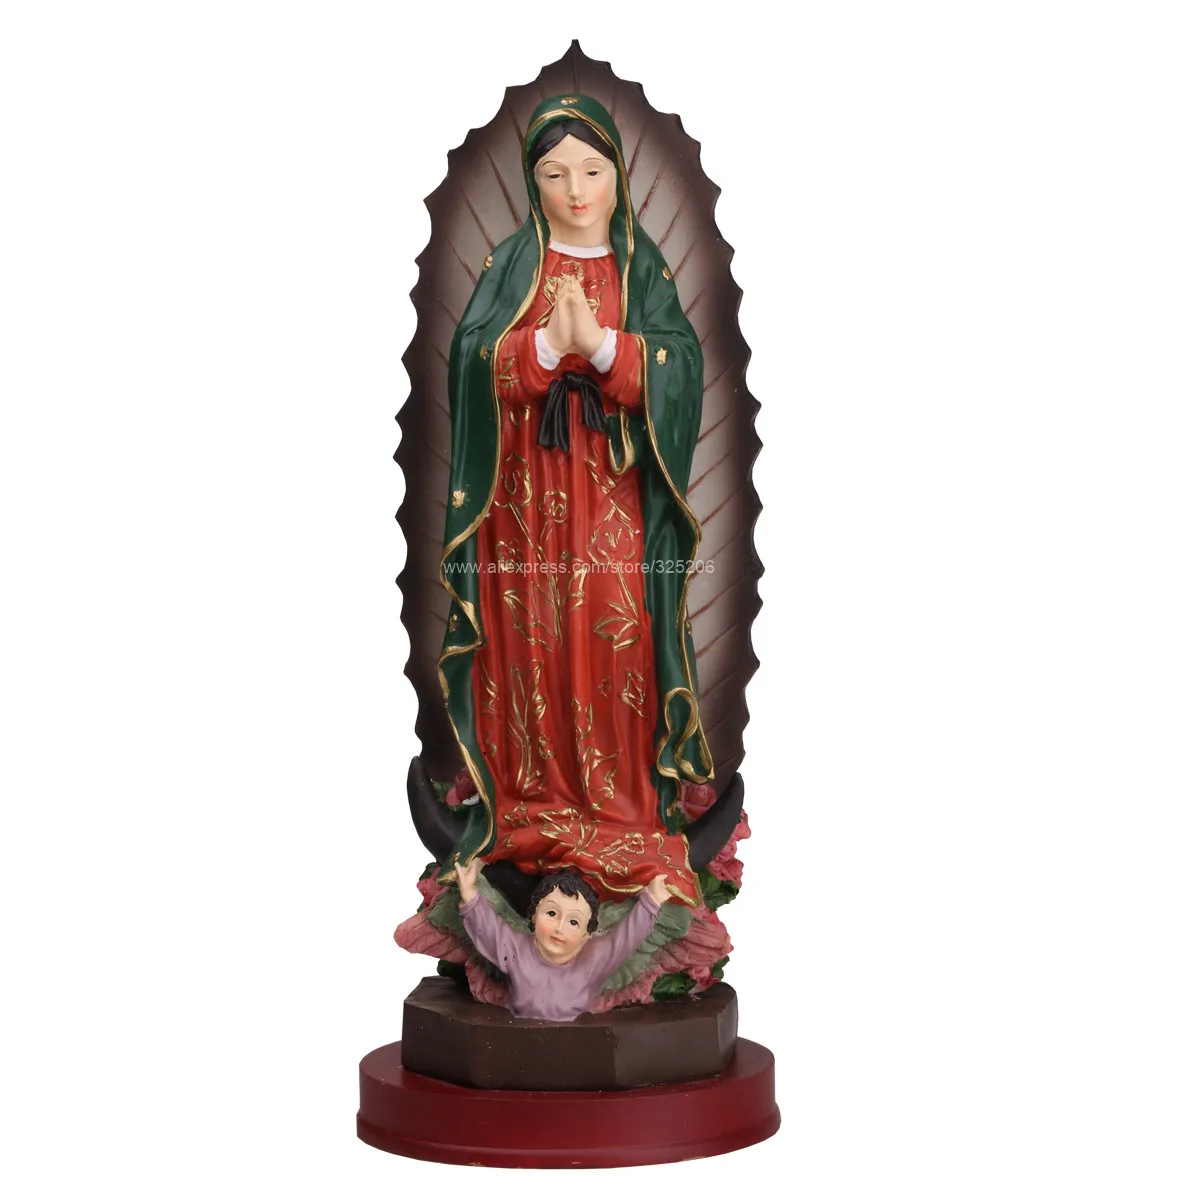 

Our Lady of Guadalupe Statue Sculpture Religious Decoration Figure For Home Church Decor Souvenirs Gift 30.5cm 12inch NEW